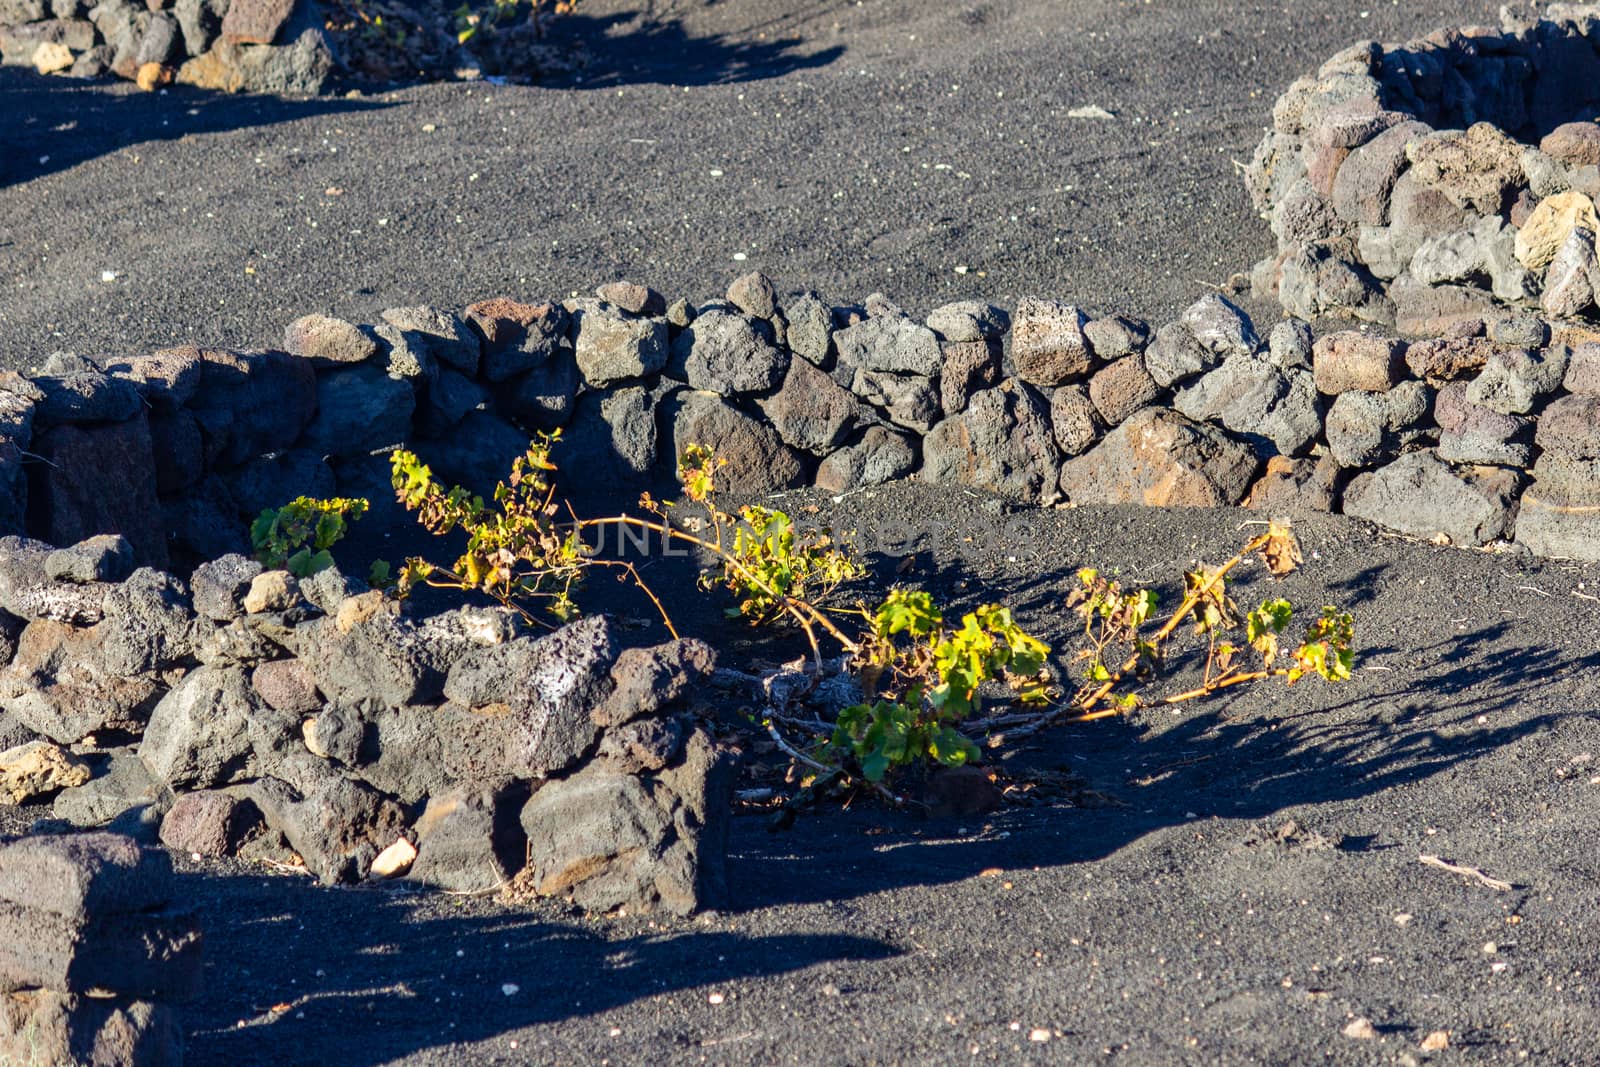 Viniculture in region La Geria on canary island Lanzarote: Vine planted in round cones in the volcanic ash surrounded with lava walls 